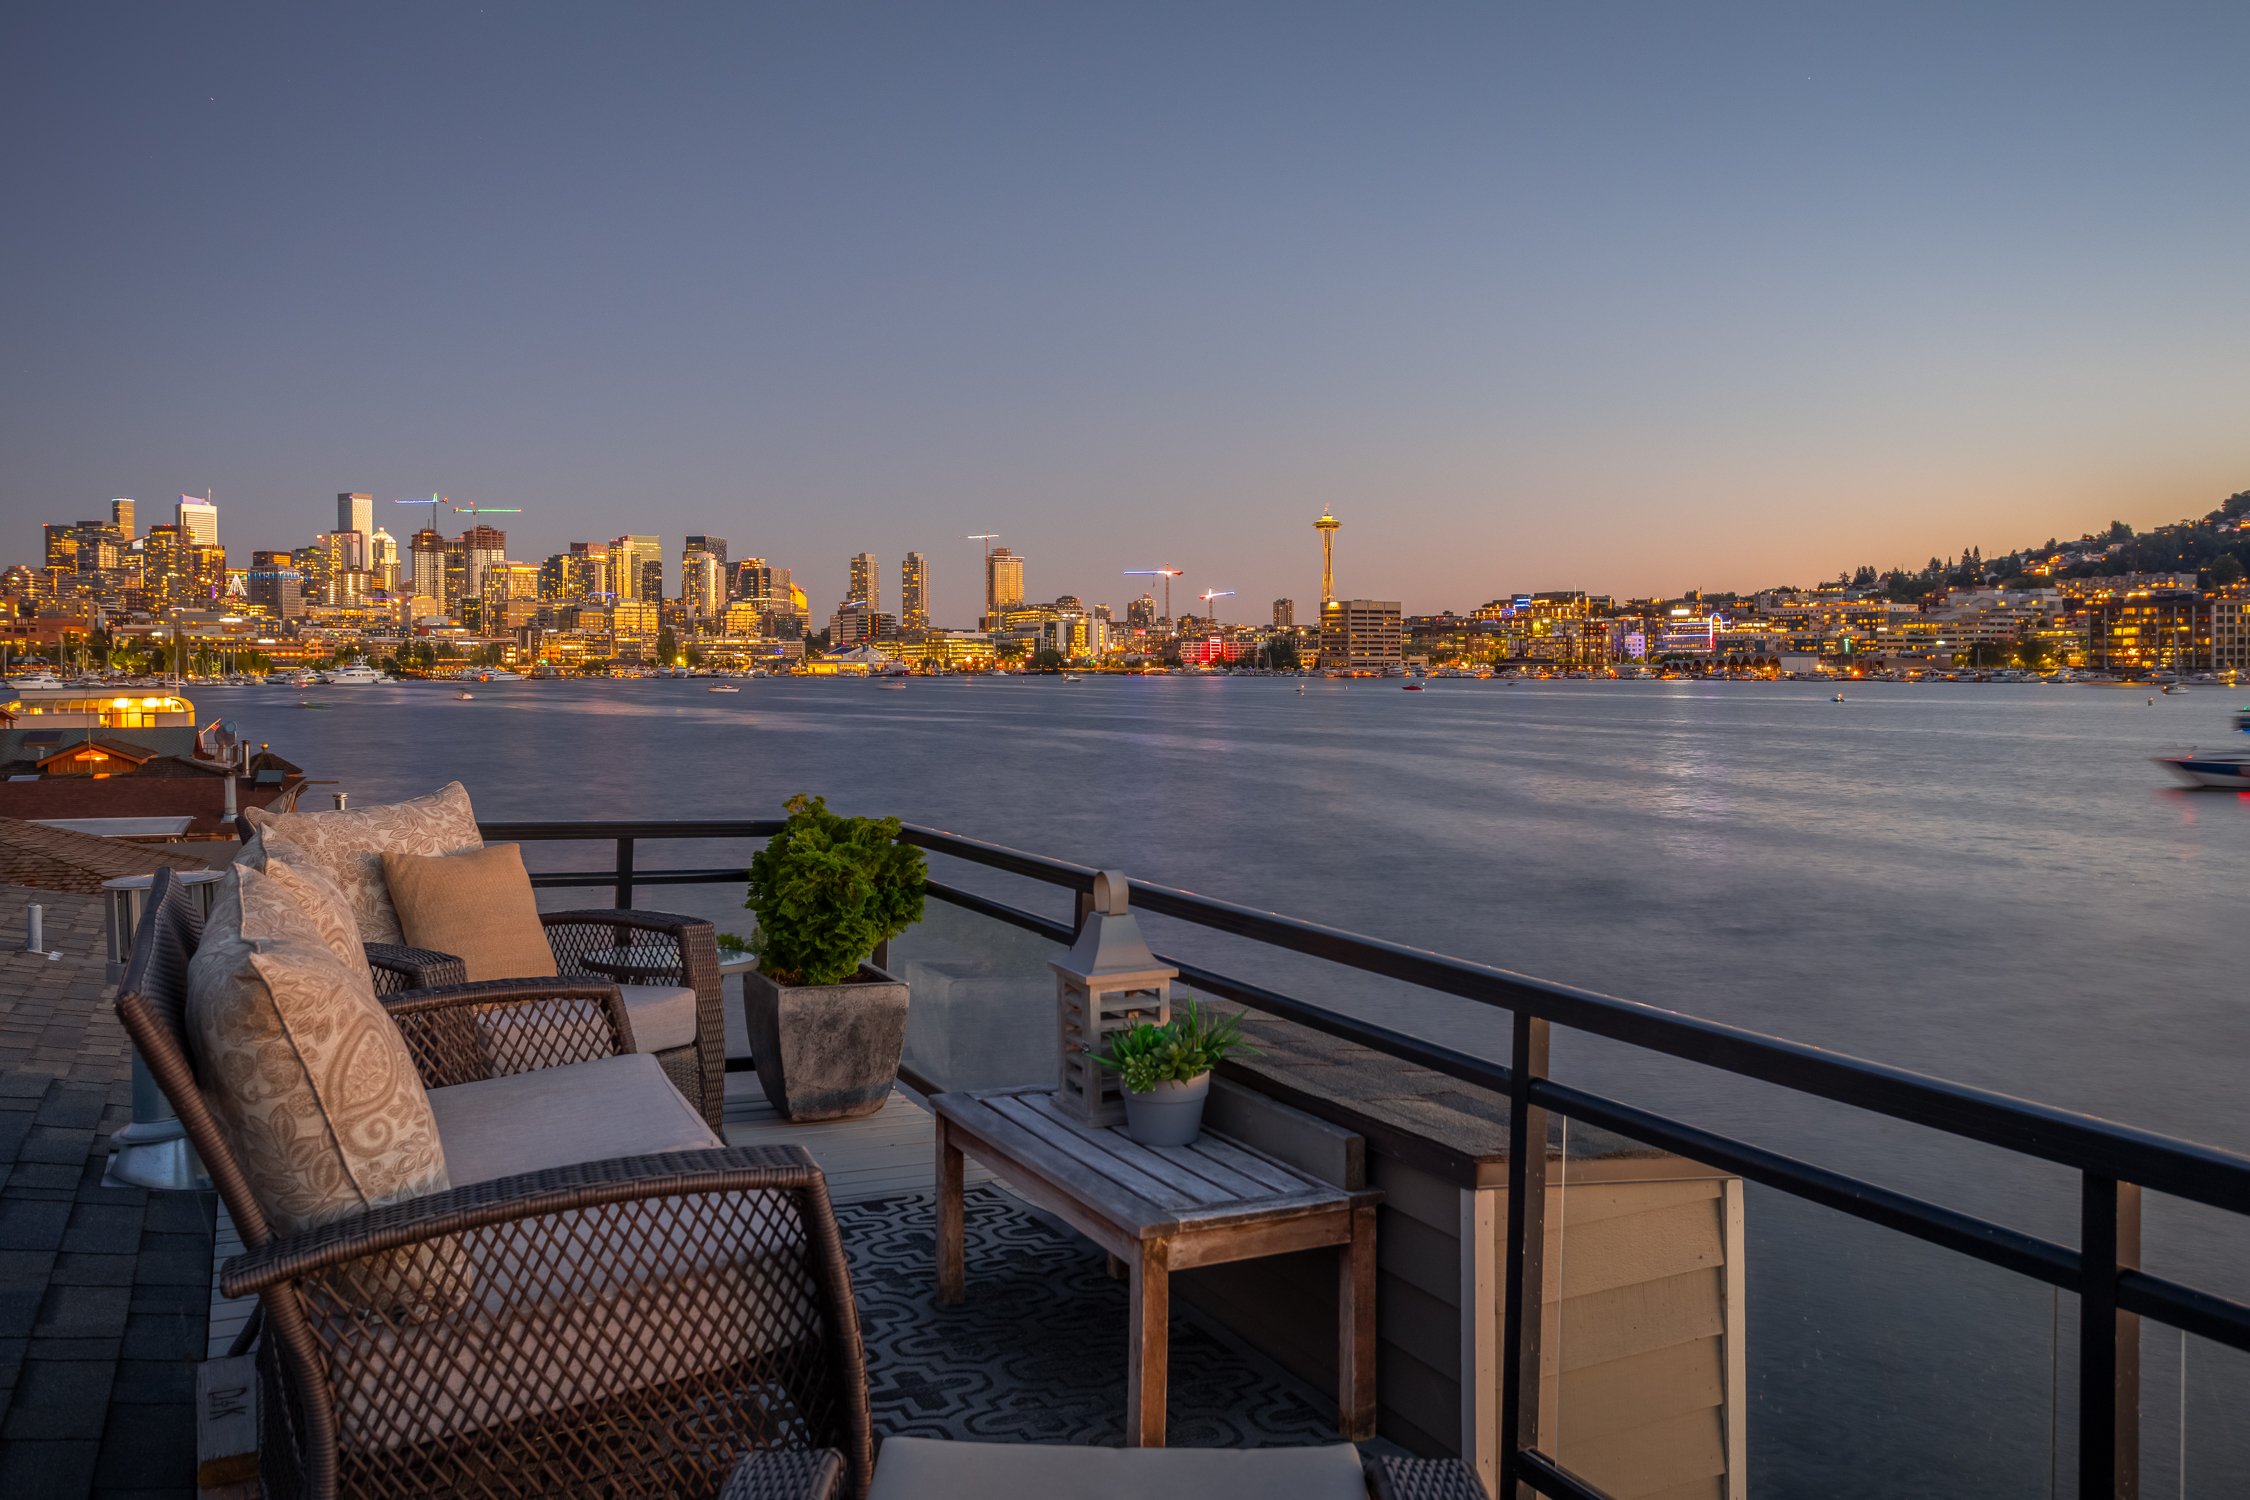 Deck from Seattle Houseboat (floating home) #H at the Lake Union Co-op dock with space needle views